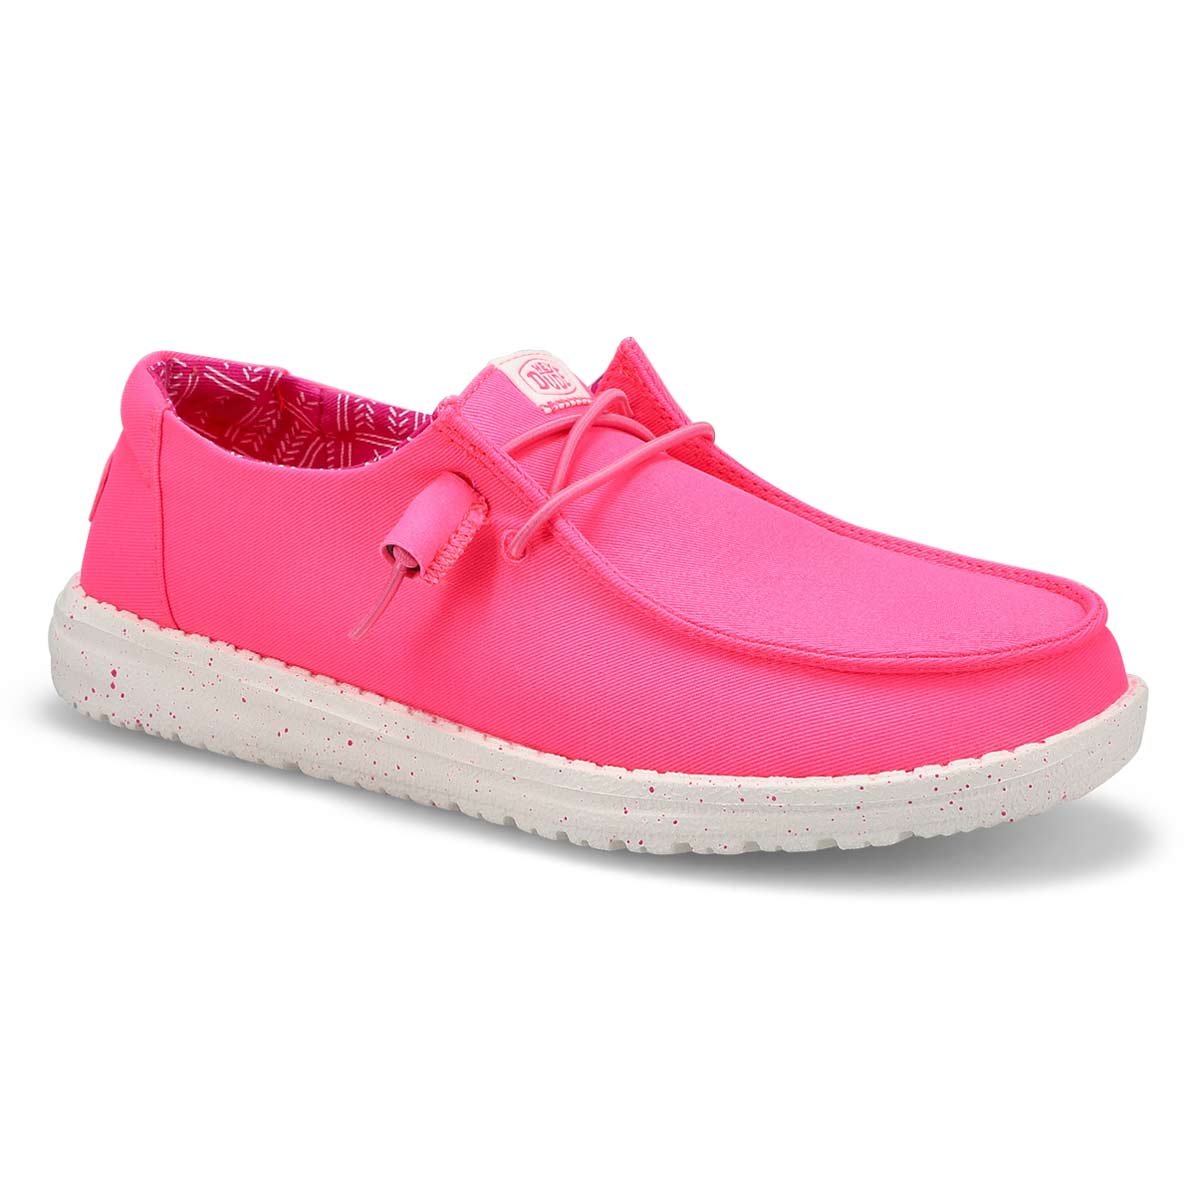 Hey Dude Wendy Linen - Casual Women's Shoes - Color Pink Lemonade -  Lightweight Comfort - Ergonomic Memory Foam Insole - Size US 12 :  : Clothing, Shoes & Accessories